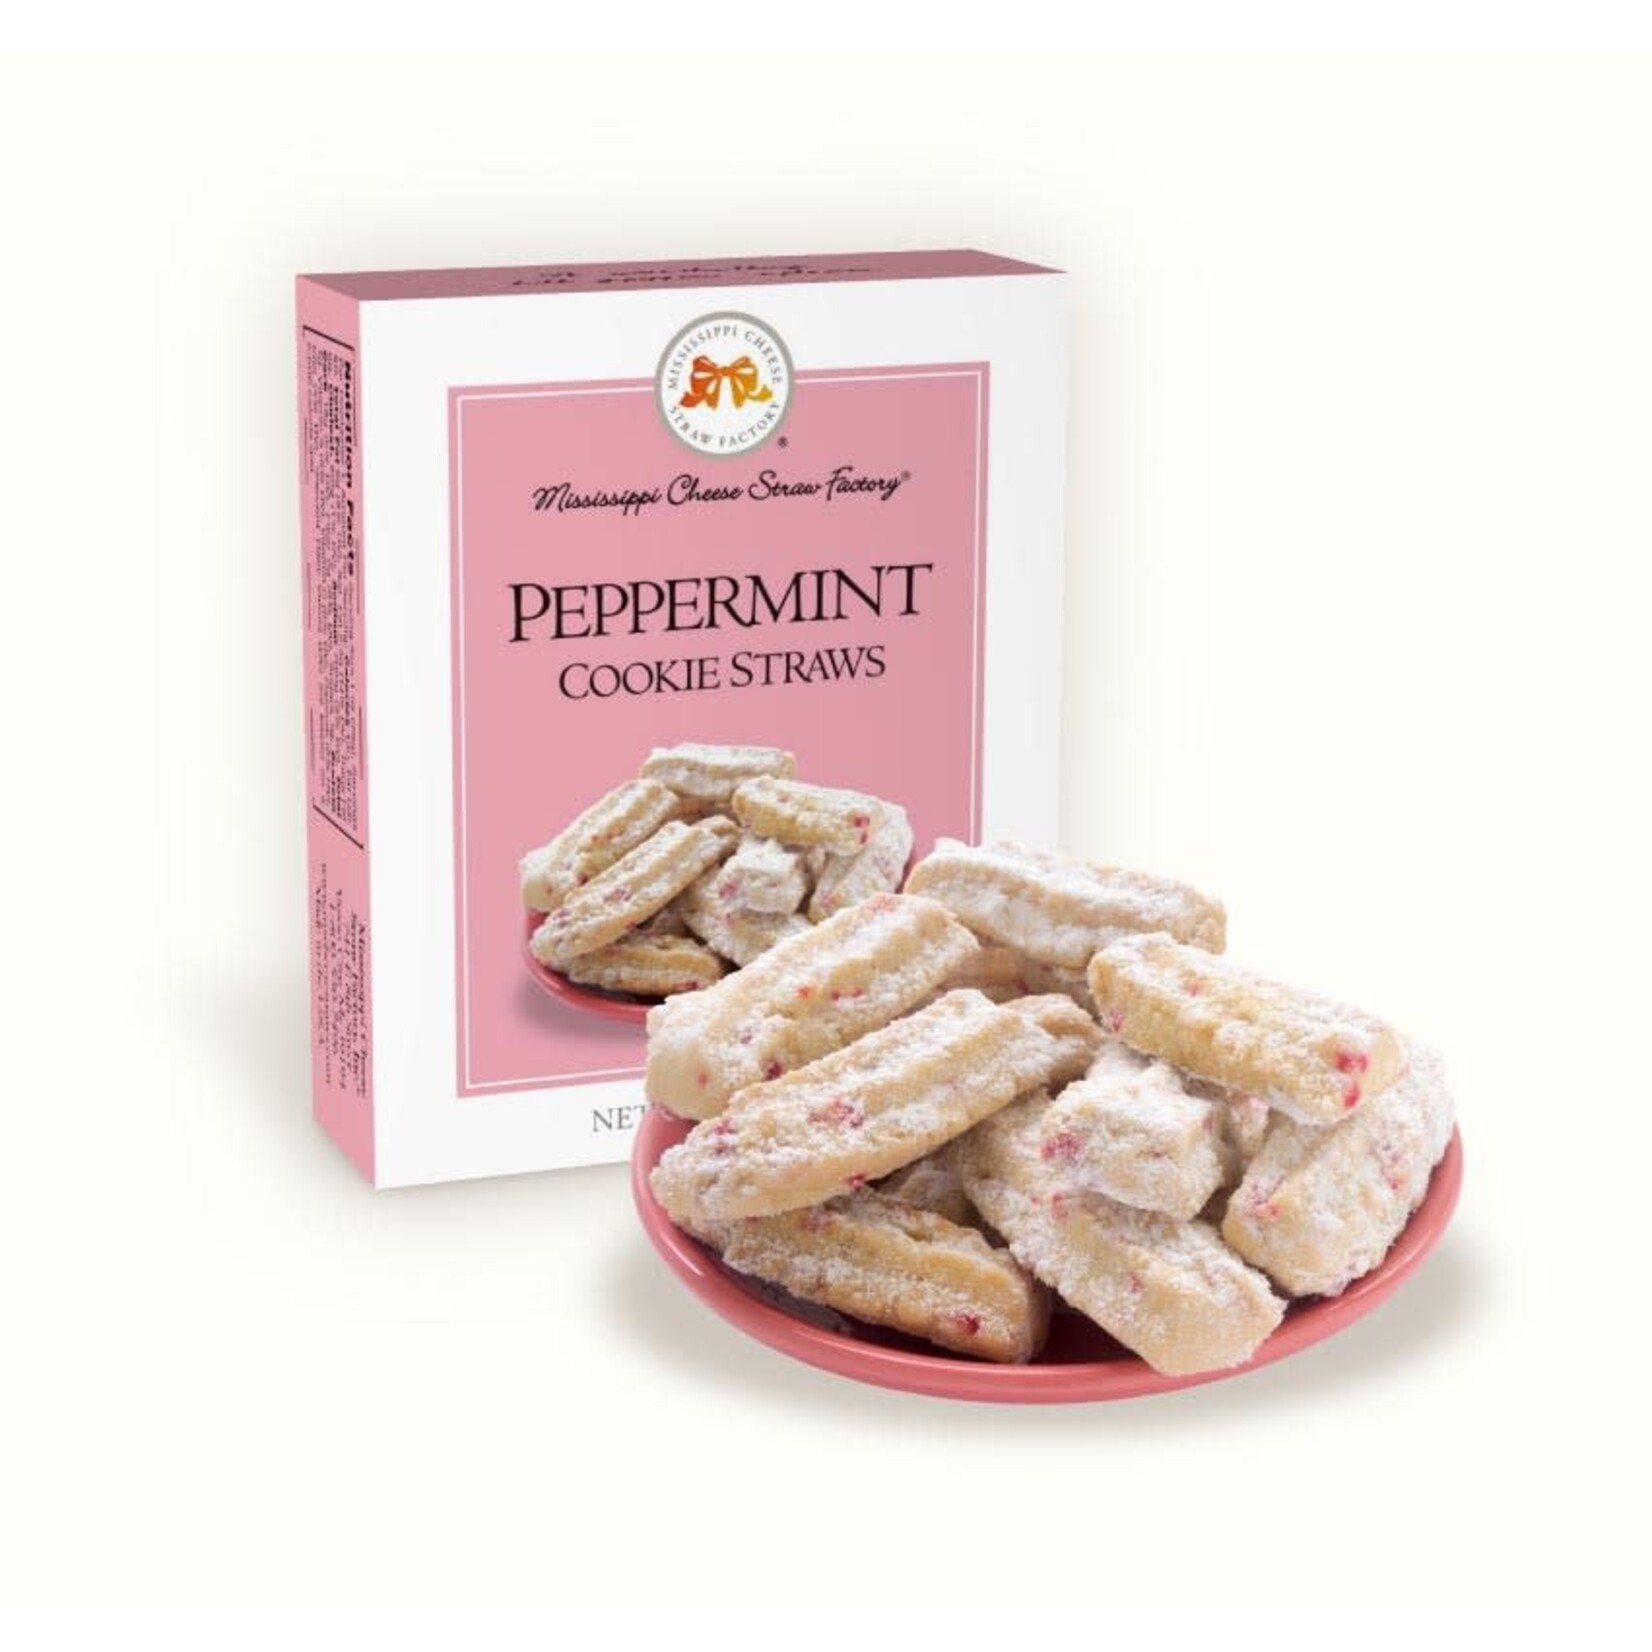 Mississippi Cheese Straw Factory PEPPERMINT COOKIE STRAWS 1 OZ